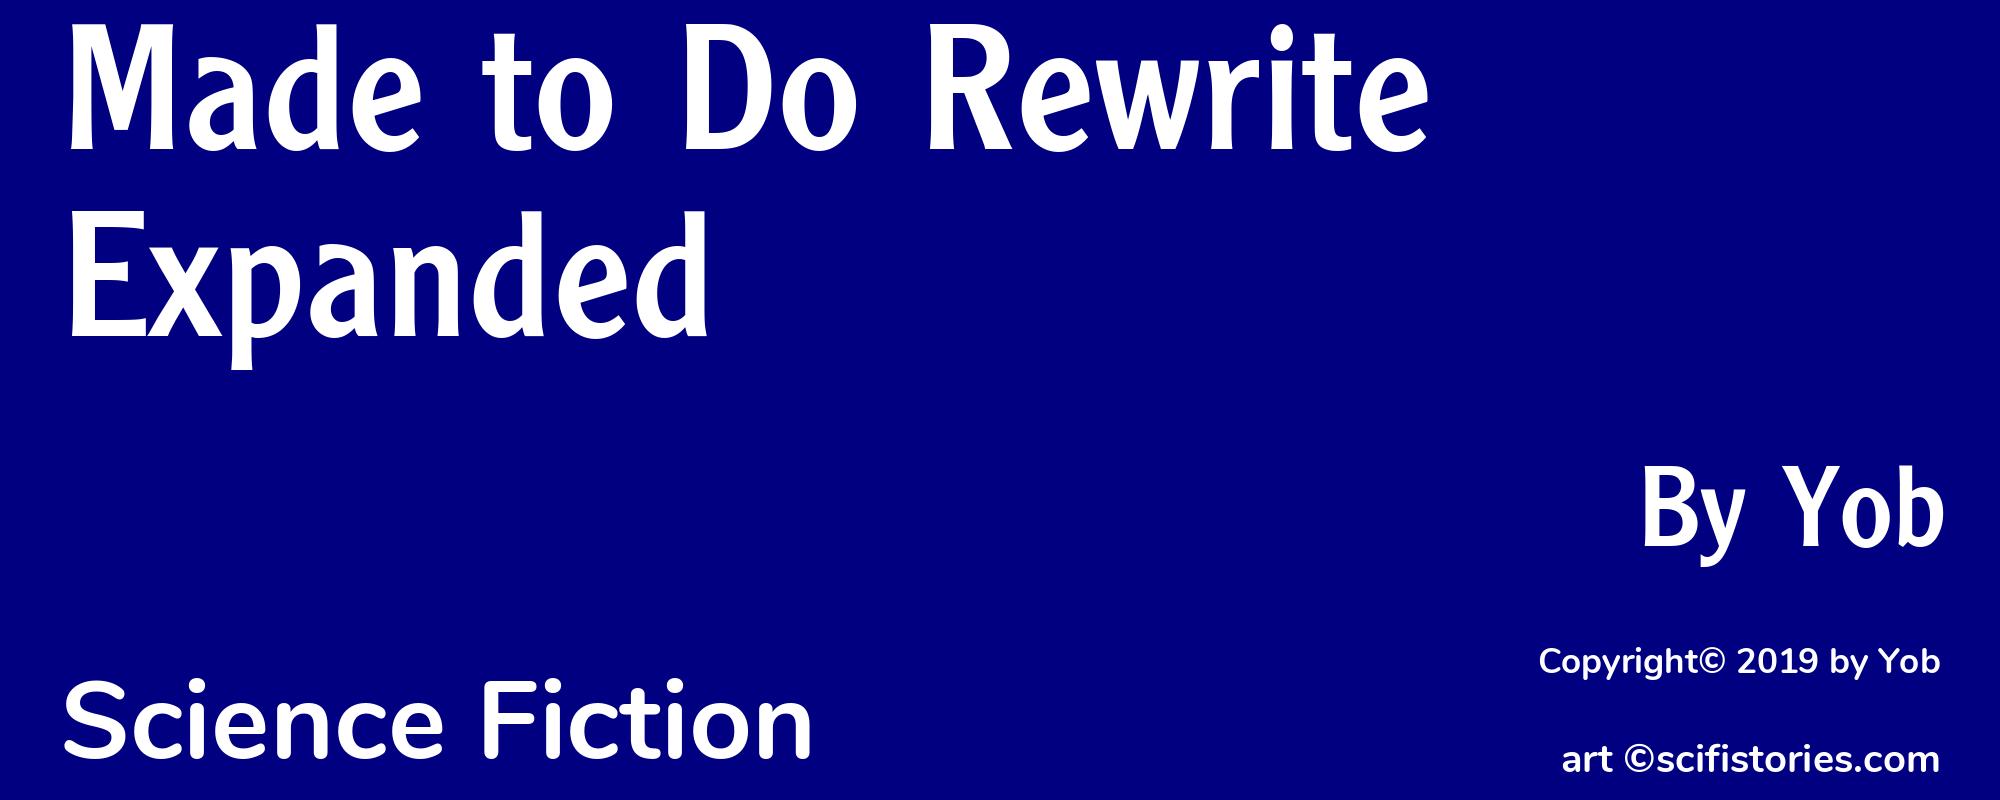 Made to Do Rewrite Expanded - Cover